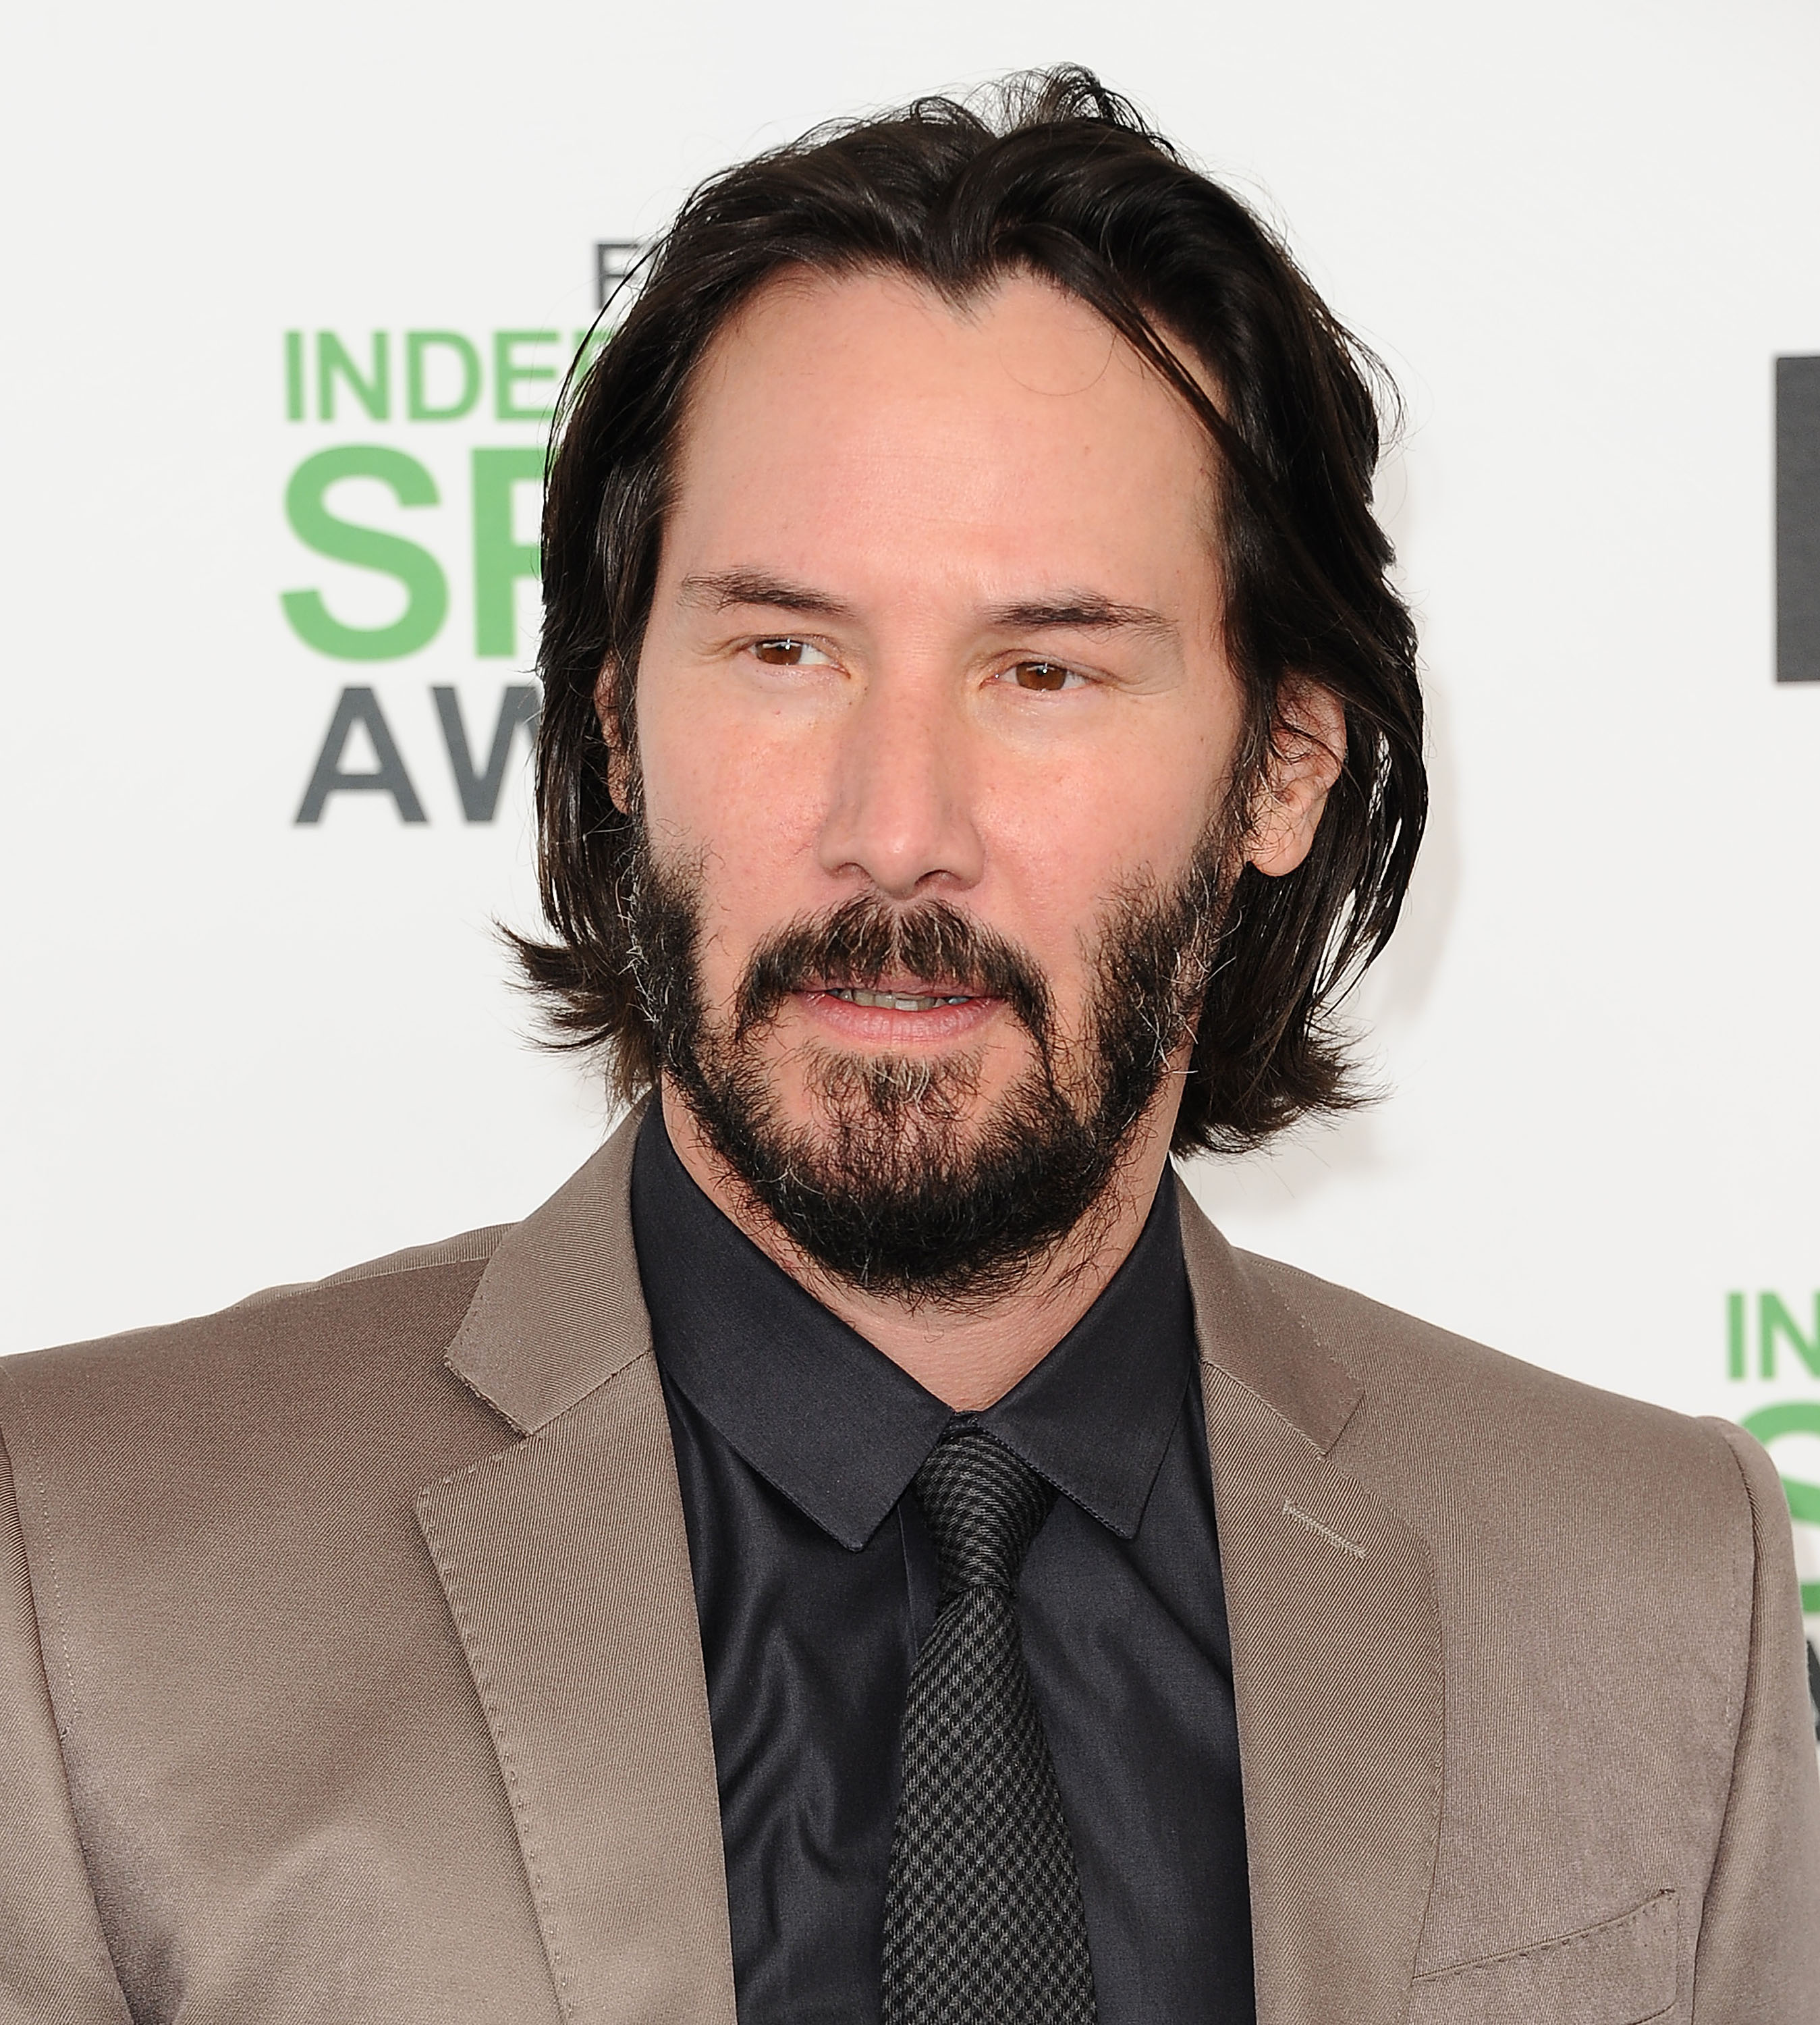 Keanu Reeves at the Film Independent Spirit Awards in Santa Monica, California on March 1, 2014 | Source: Getty Images